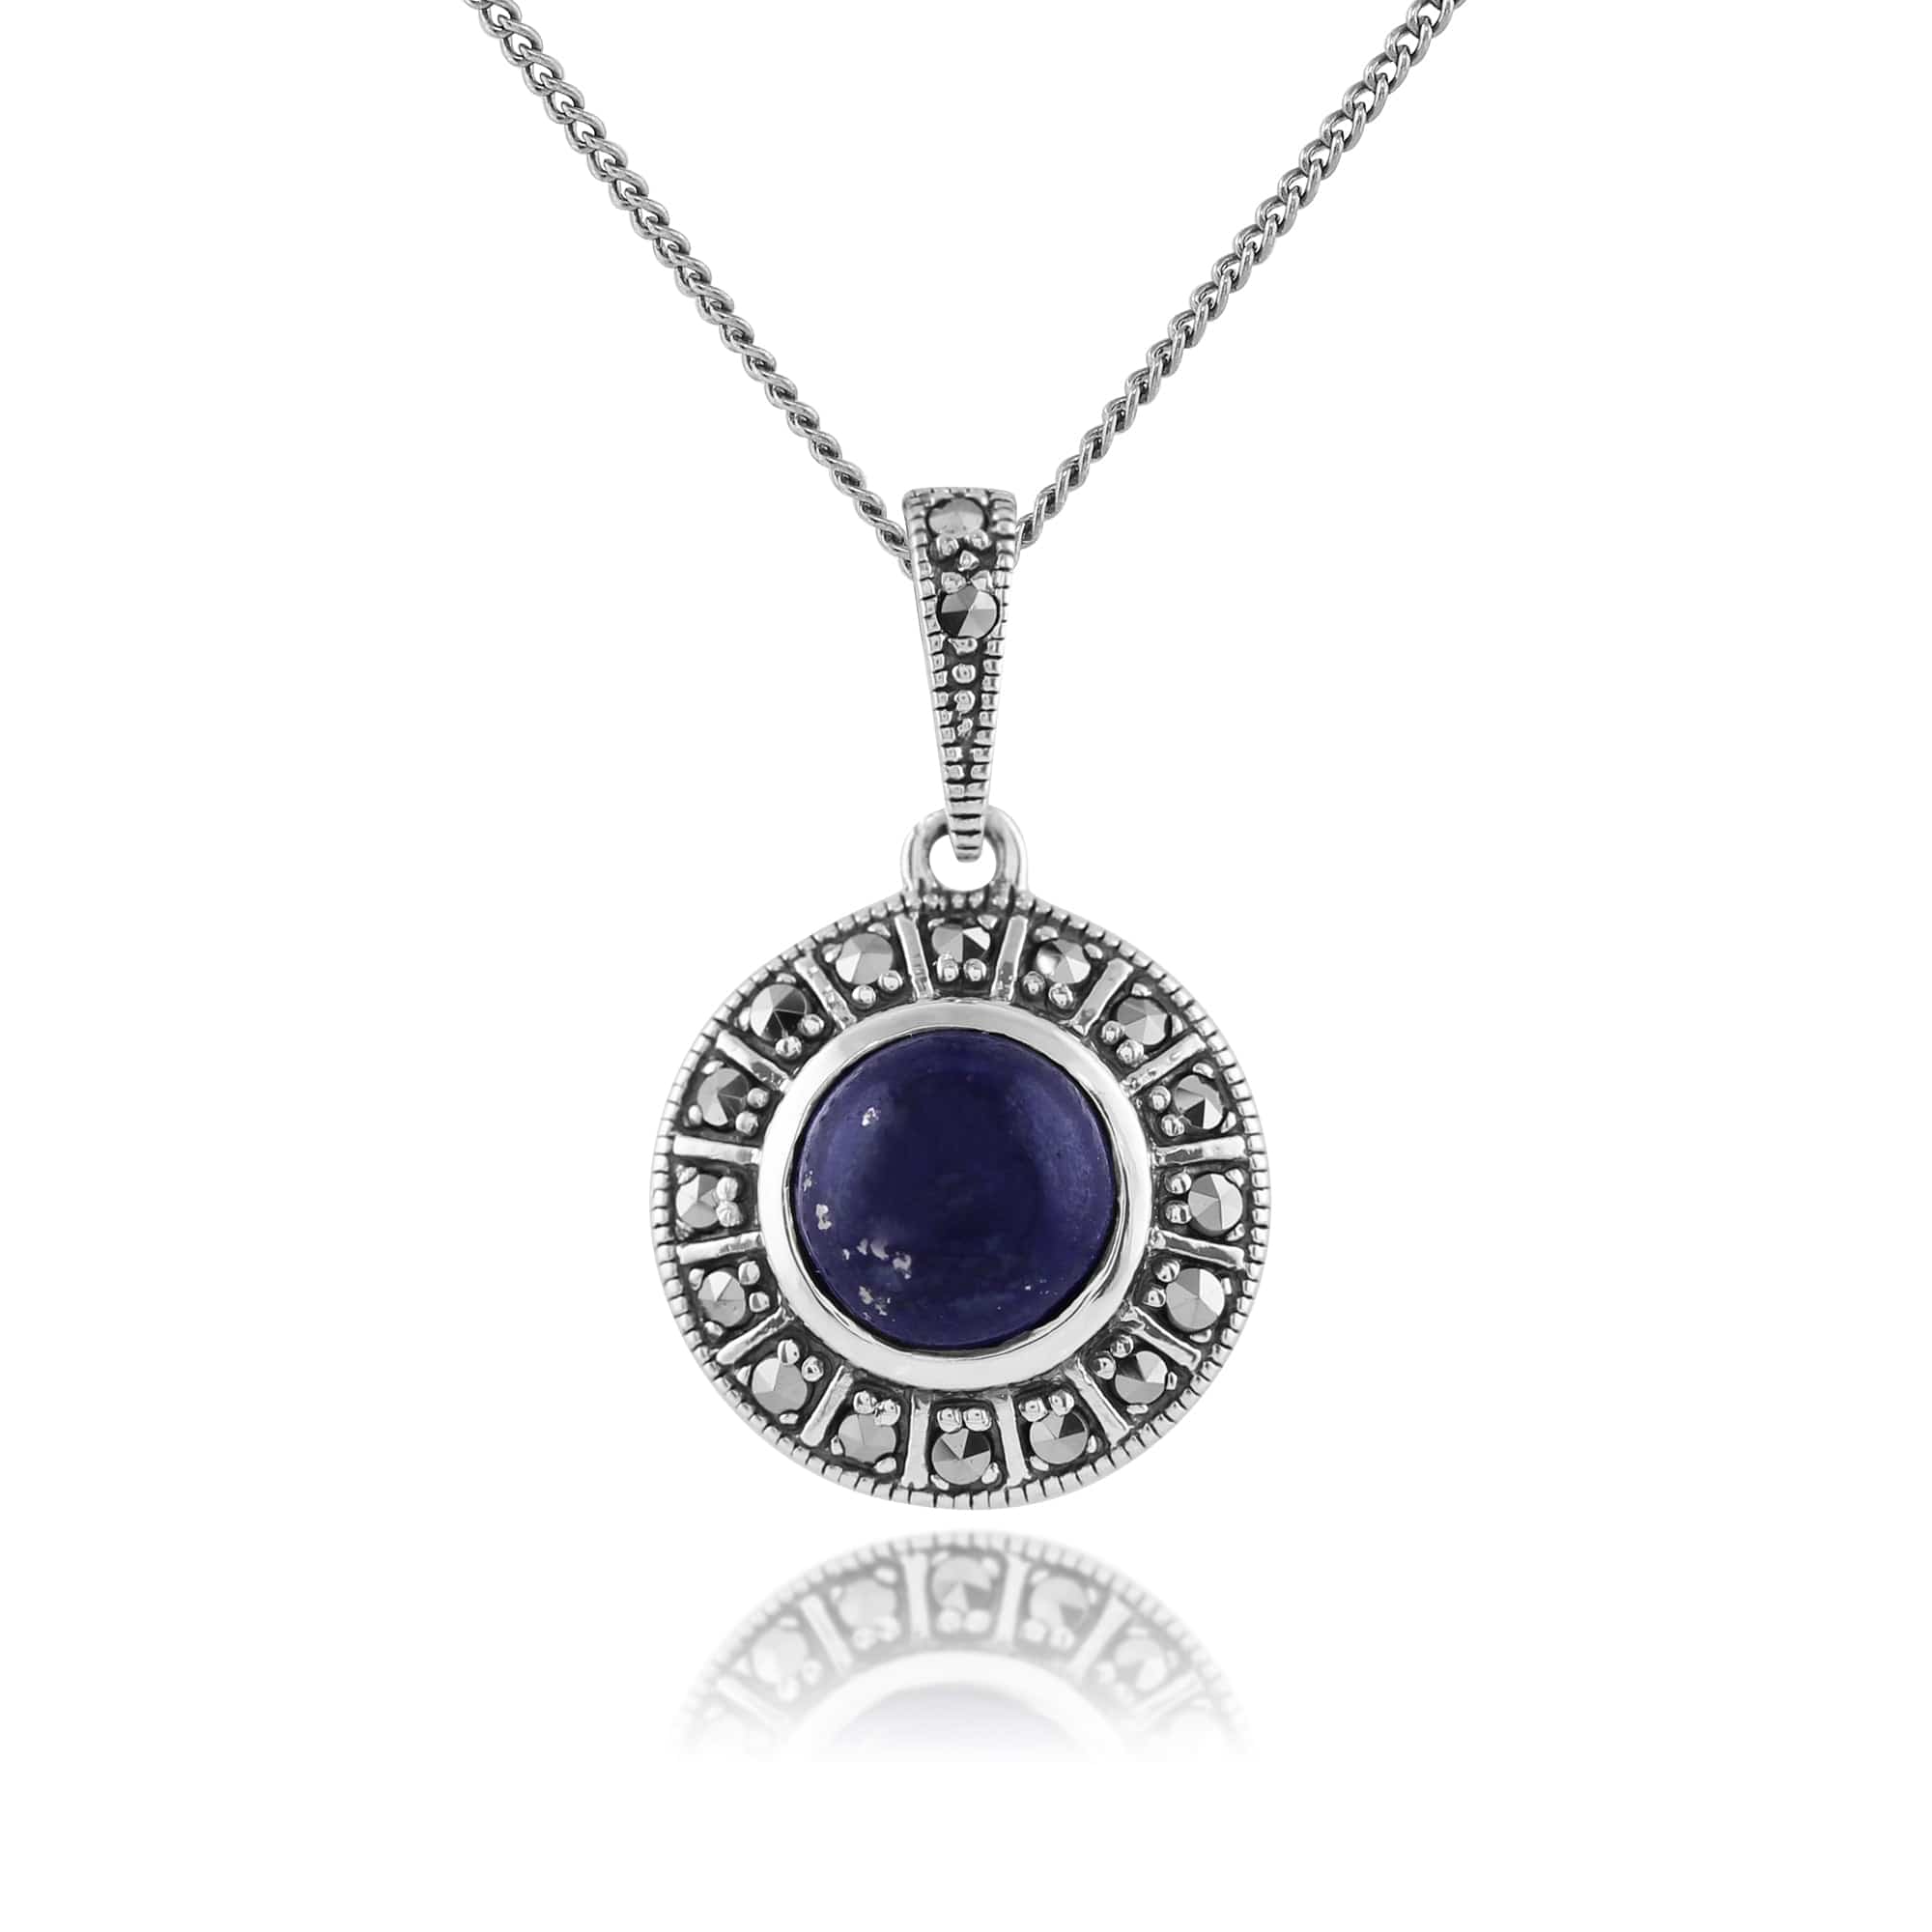 Image of Art Deco Style Round Lapis Lazuli Cabochon & Marcasite Pendant in 925 Sterling Silver